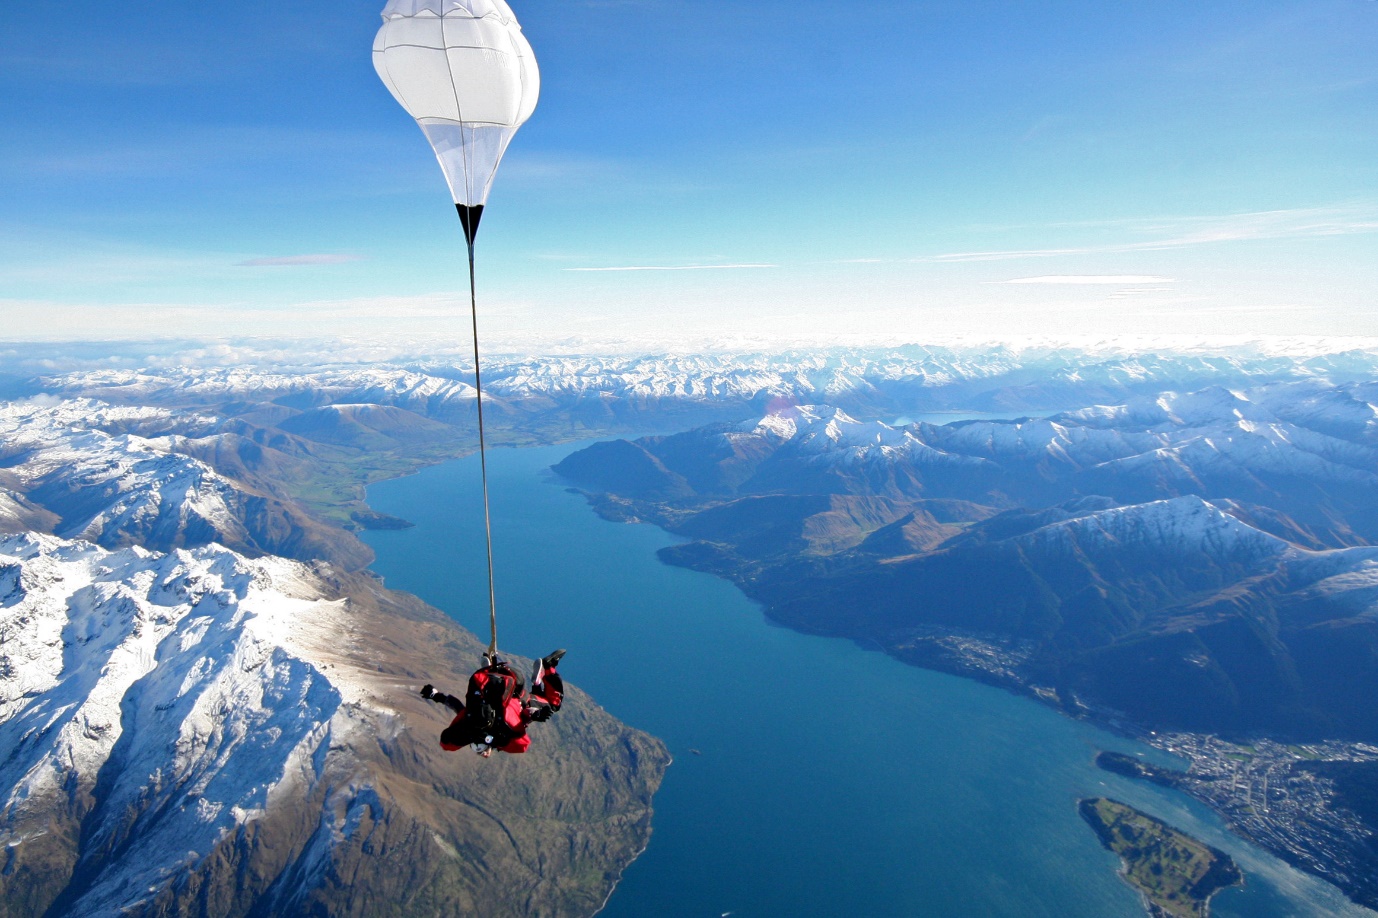 Skydiving over Queenstown with tremendous views